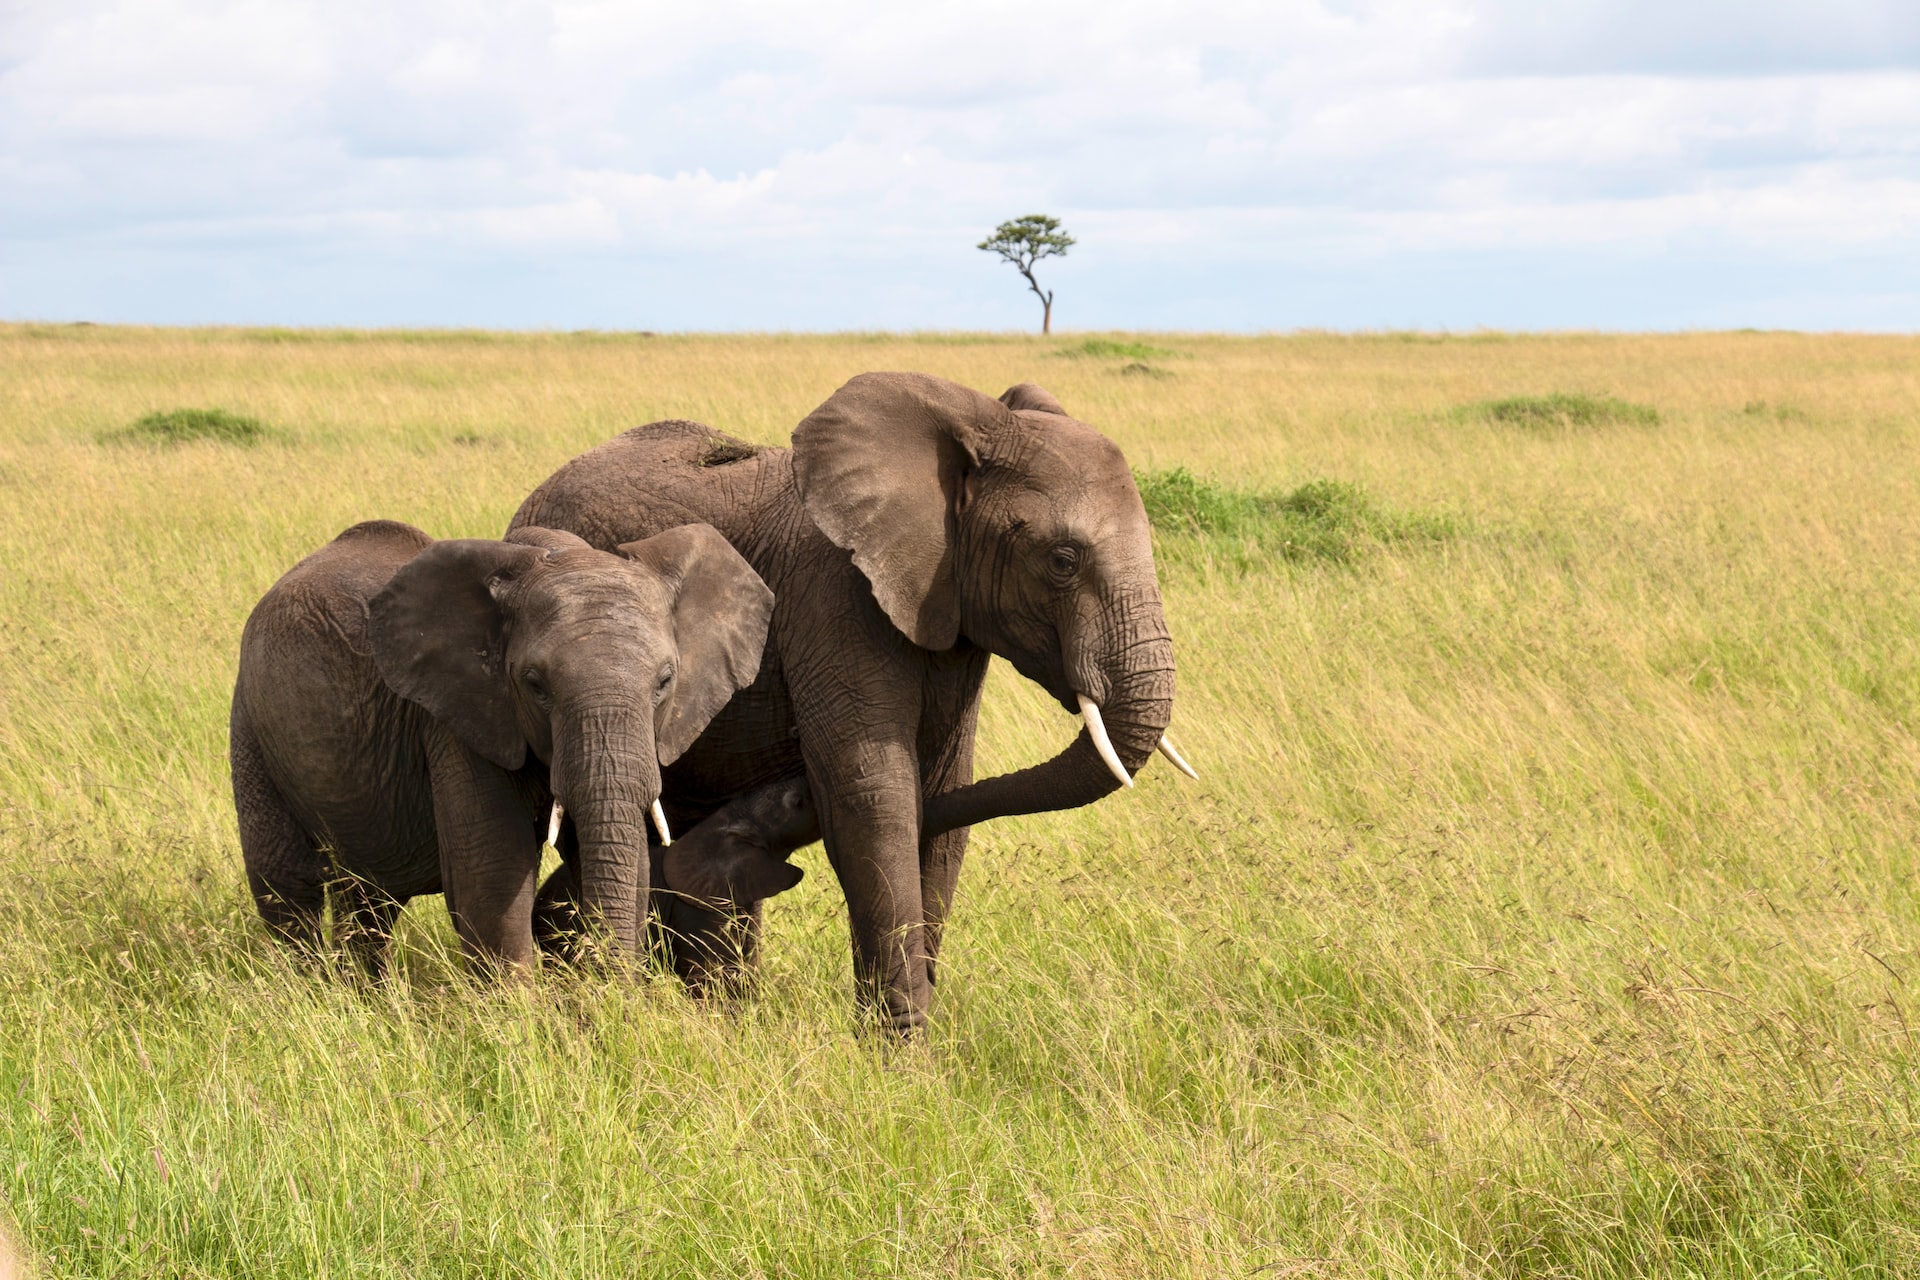 10 Fascinating Facts About Elephants You Didn’t Know